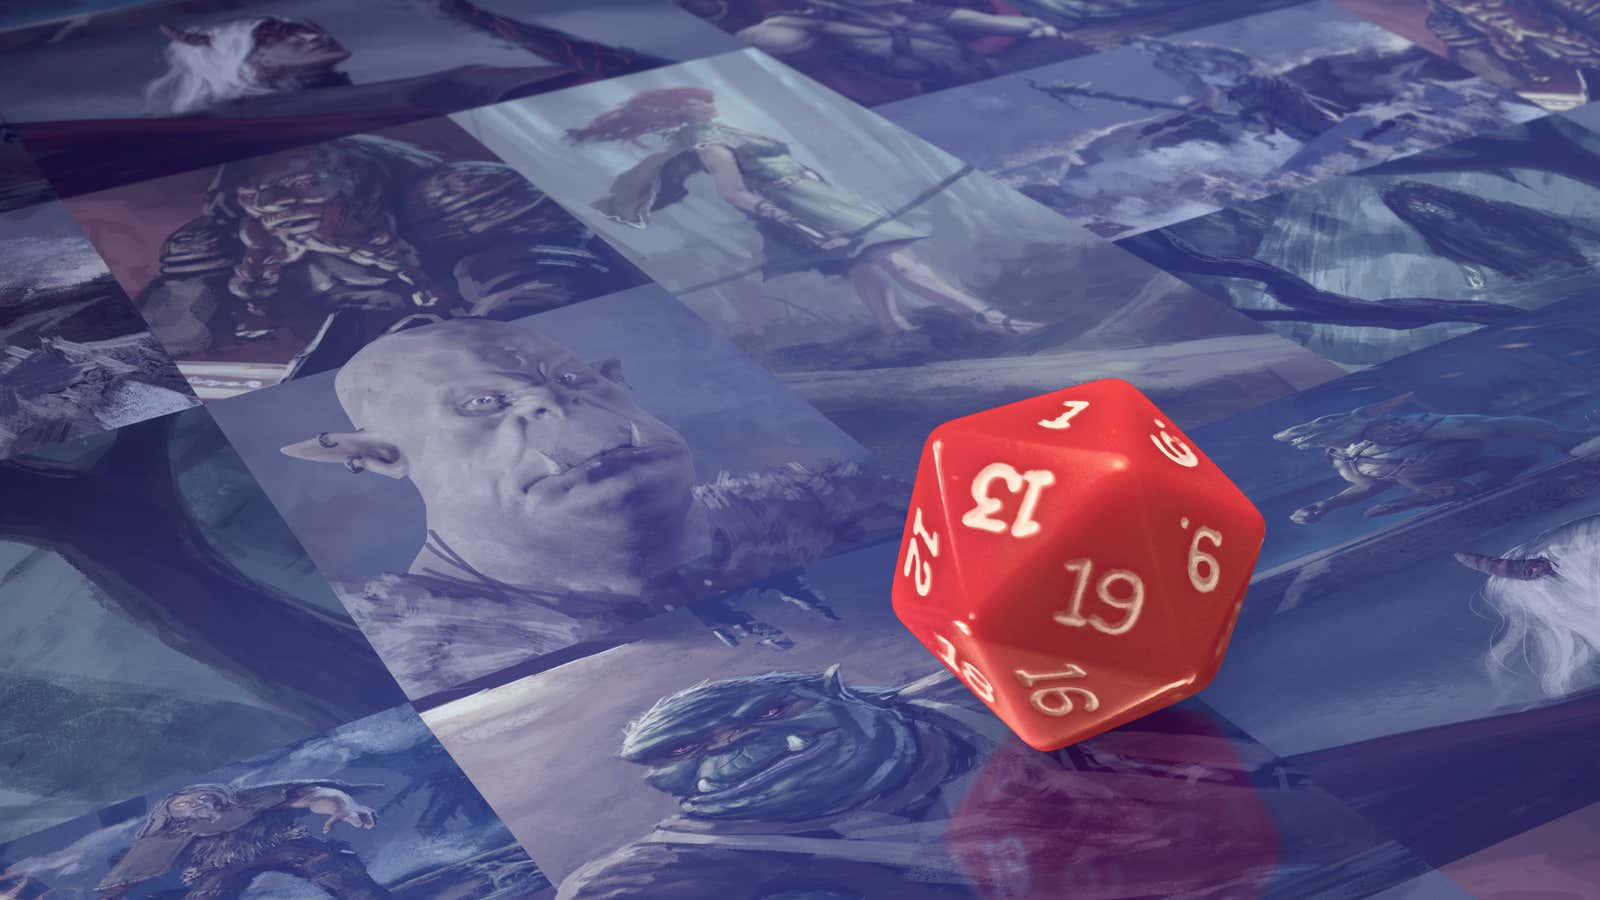 Dungeons & Dragons' To Remove Term 'Race' From Game Lexicon Due To Its  Prejudiced Links Between Real World And Fantasy Peoples - Bounding Into  Comics